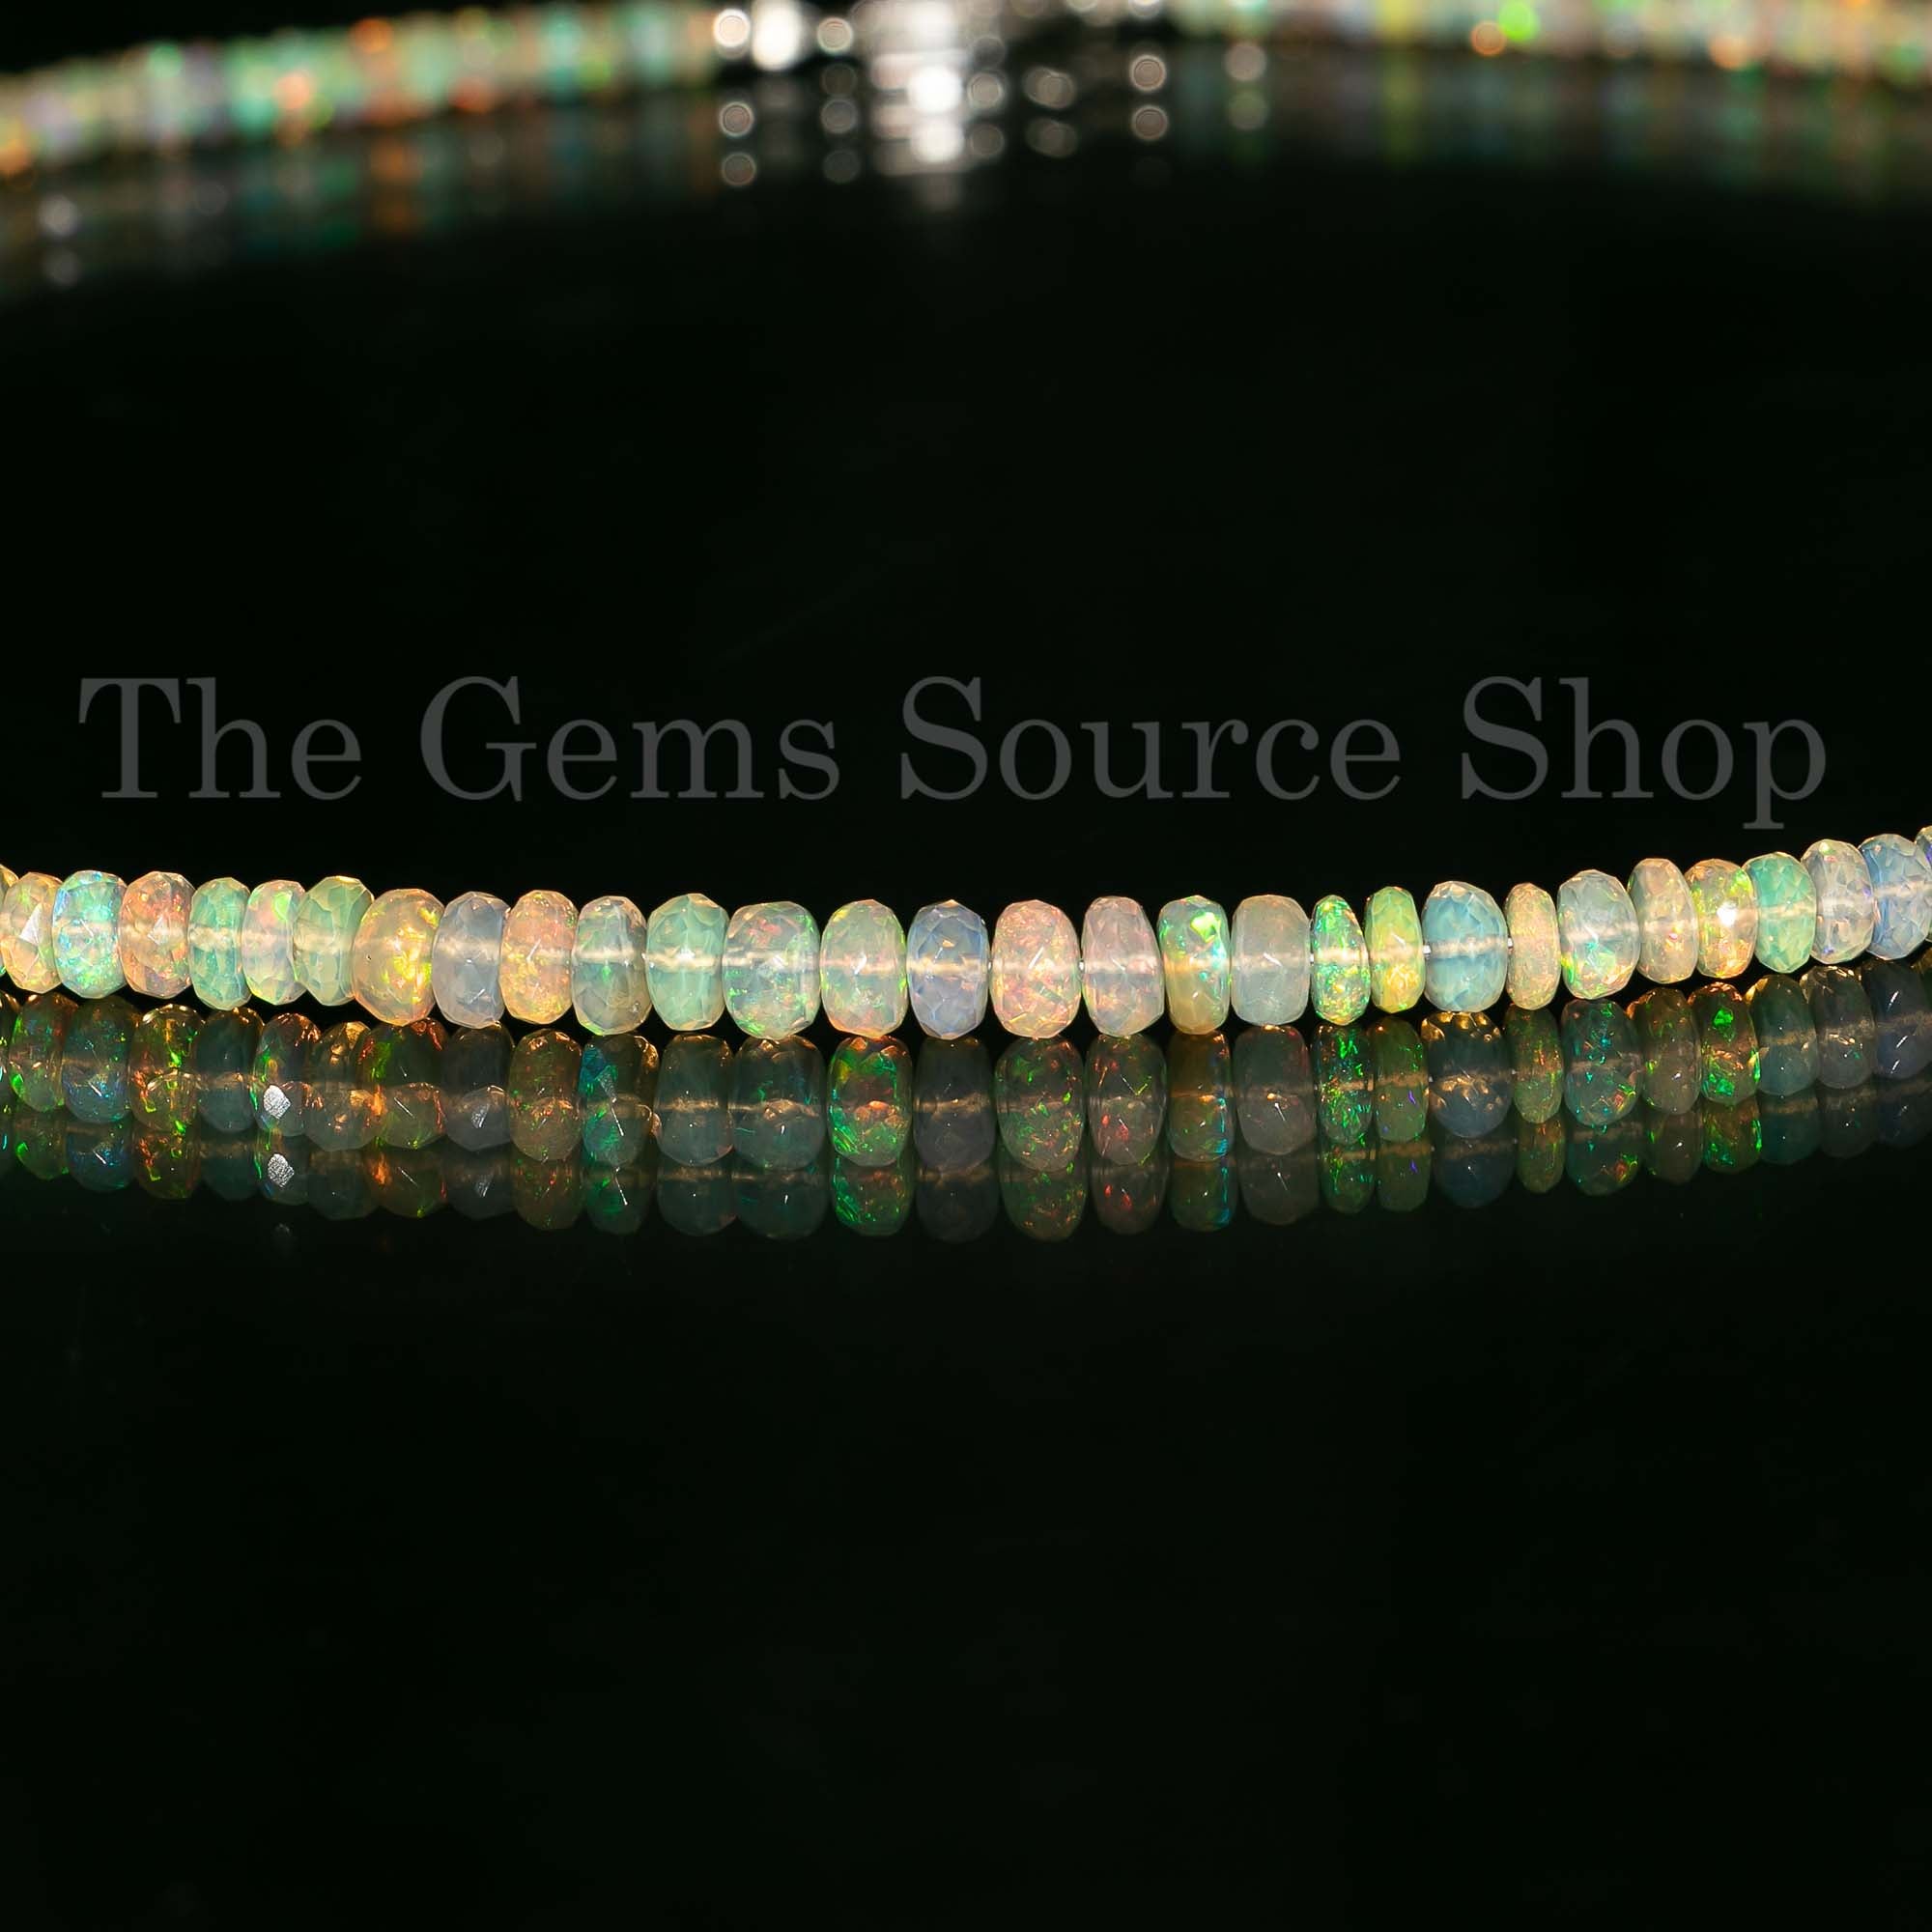 Ethiopian Opal Necklace, 3.5-5mm Opal Faceted Rondelle Rondelle, Opal Faceted Beads, Opal Beads, Ethiopian Opal Necklace, Opal Jewelry